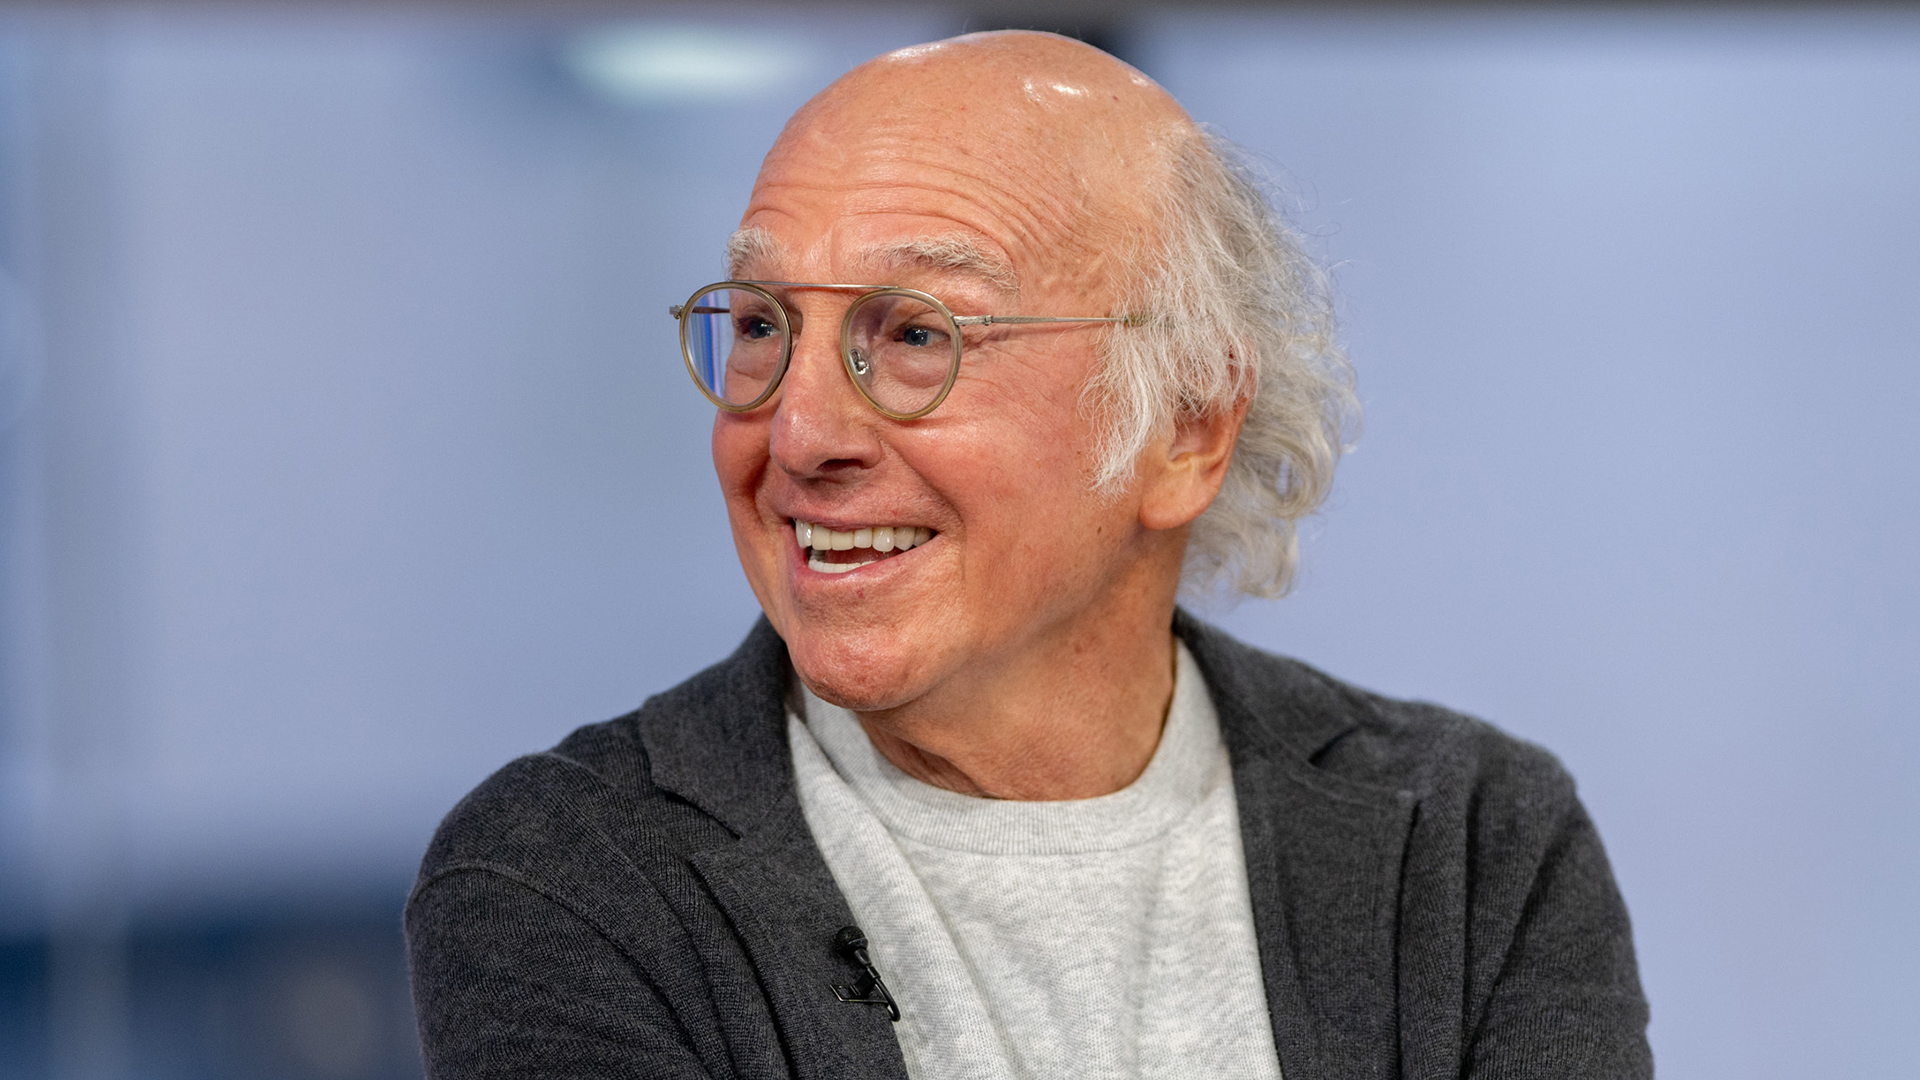 Larry David on 'Curb' sendoff: I'm almost ready for a nursing home